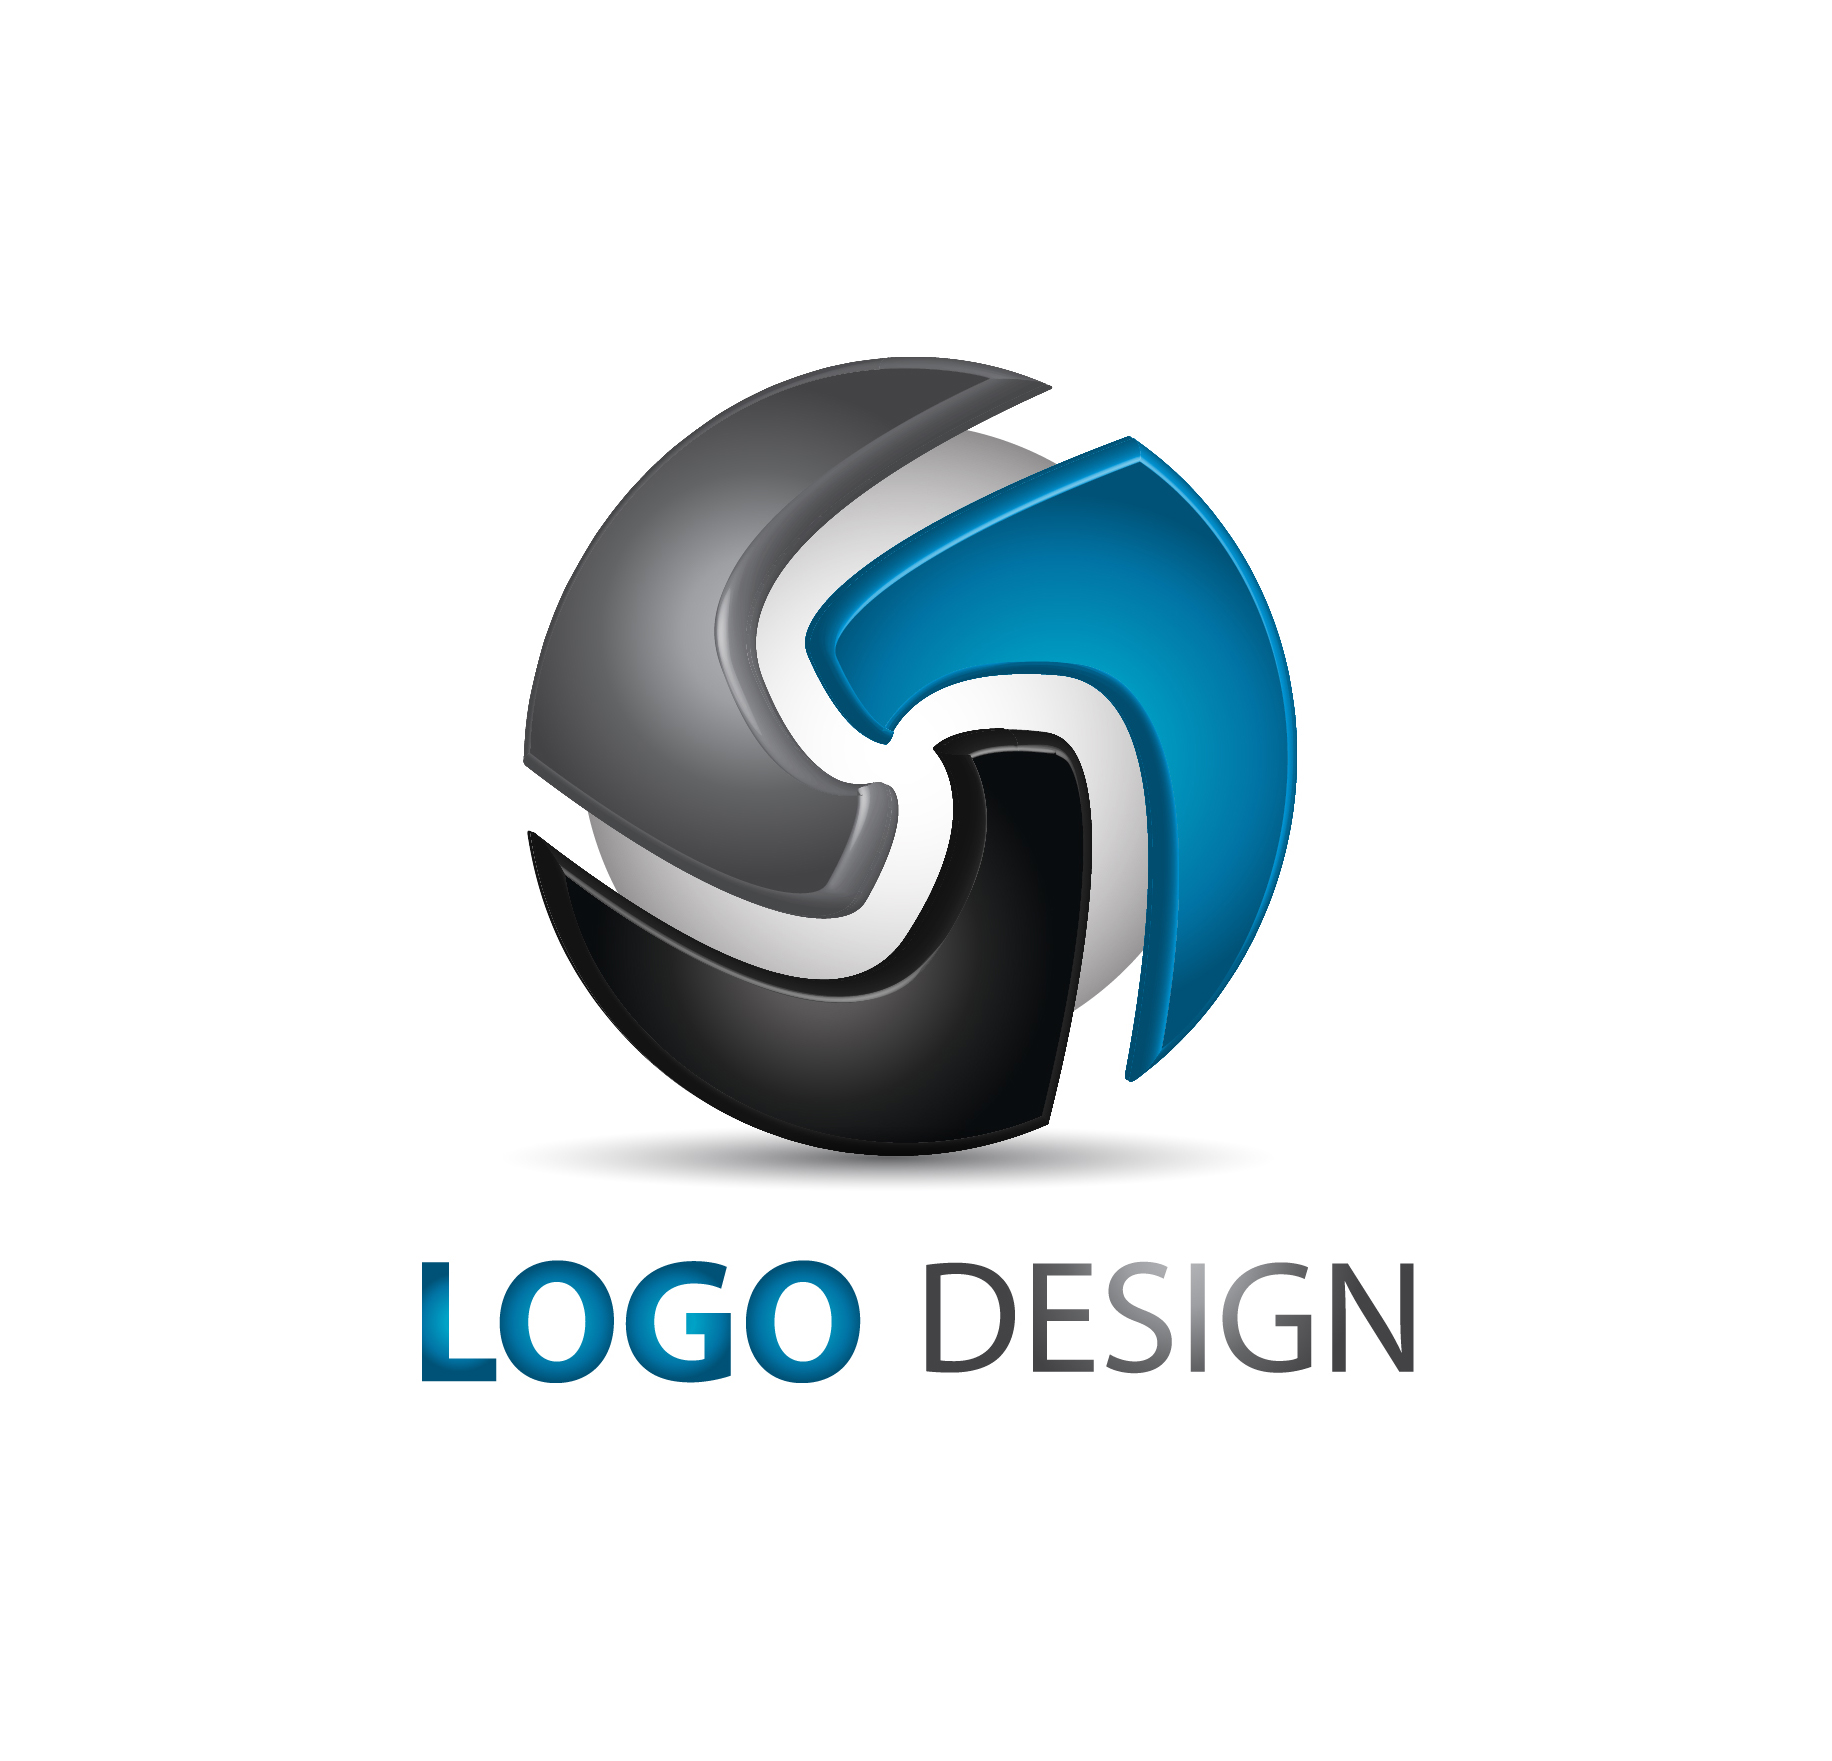 How To Create A 3d Logo On Illustrator